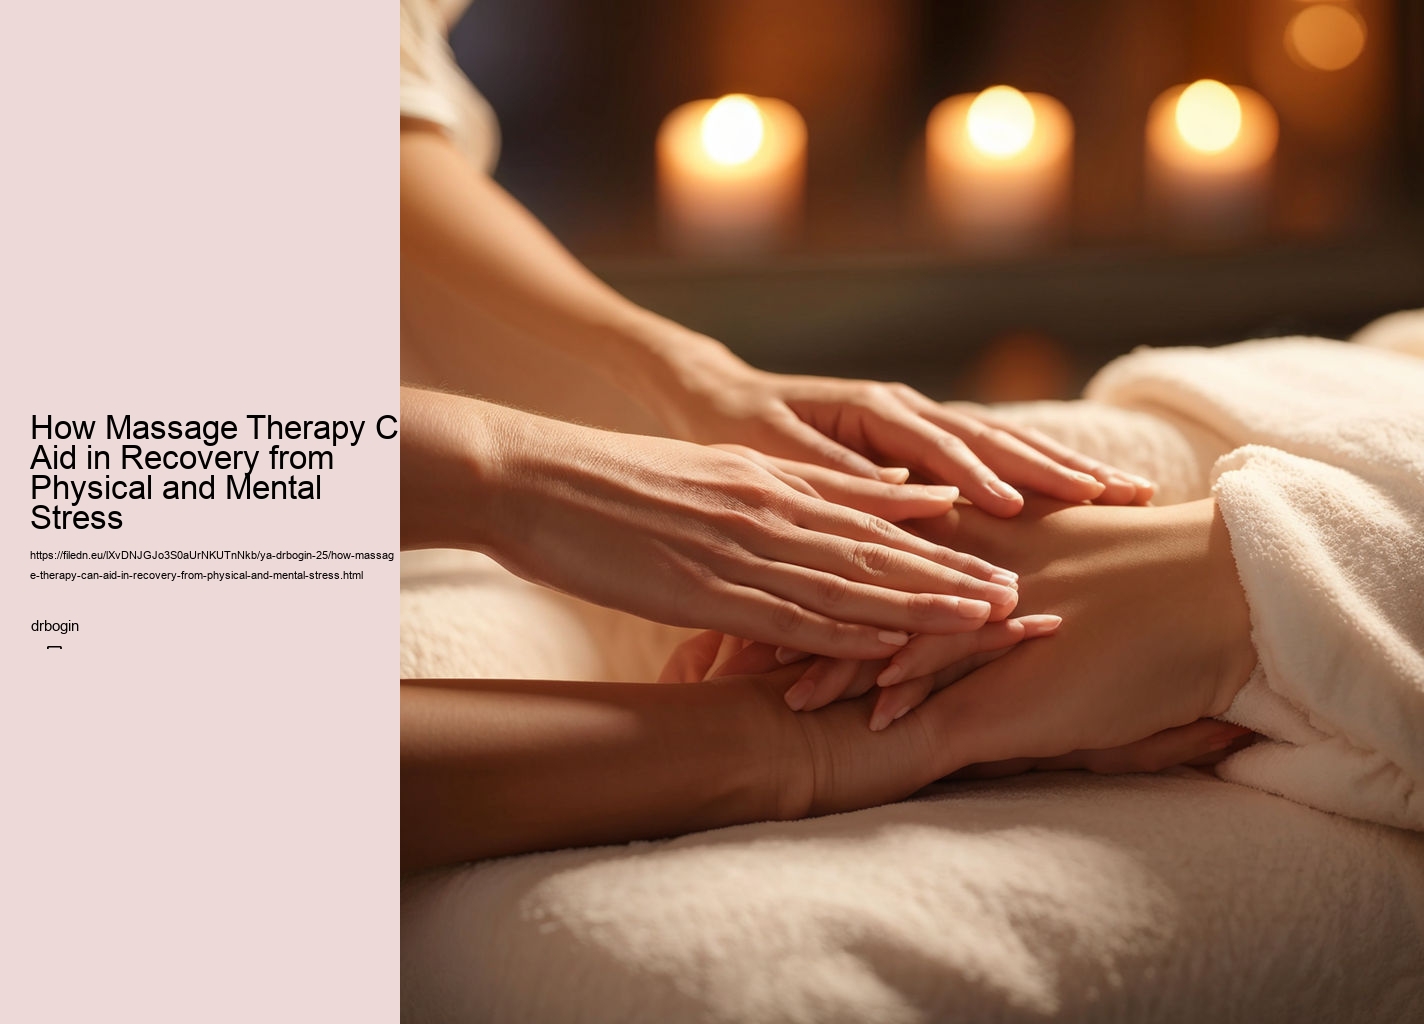 How Massage Therapy Can Aid in Recovery from Physical and Mental Stress